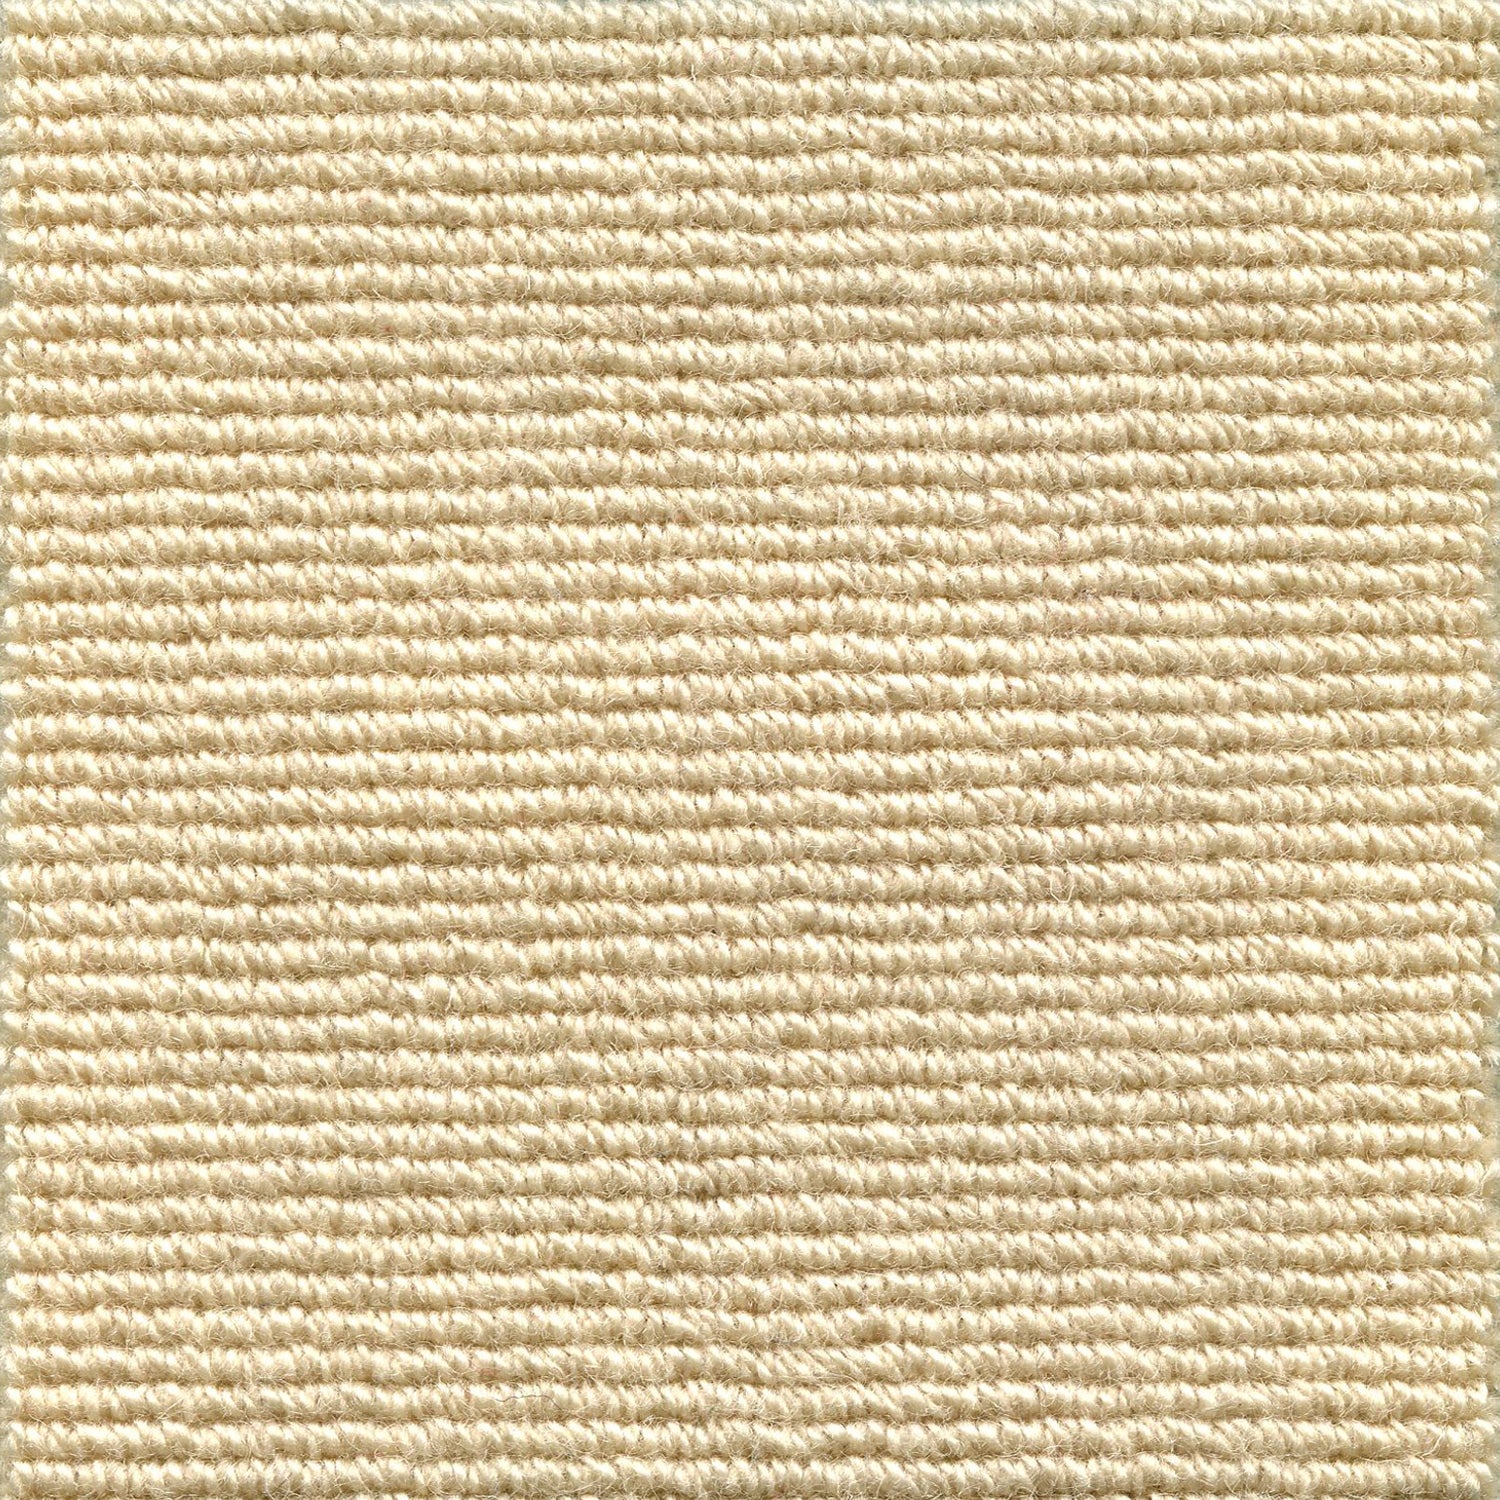 Wool broadloom carpet swatch in a chunky ribbed weave in cream.